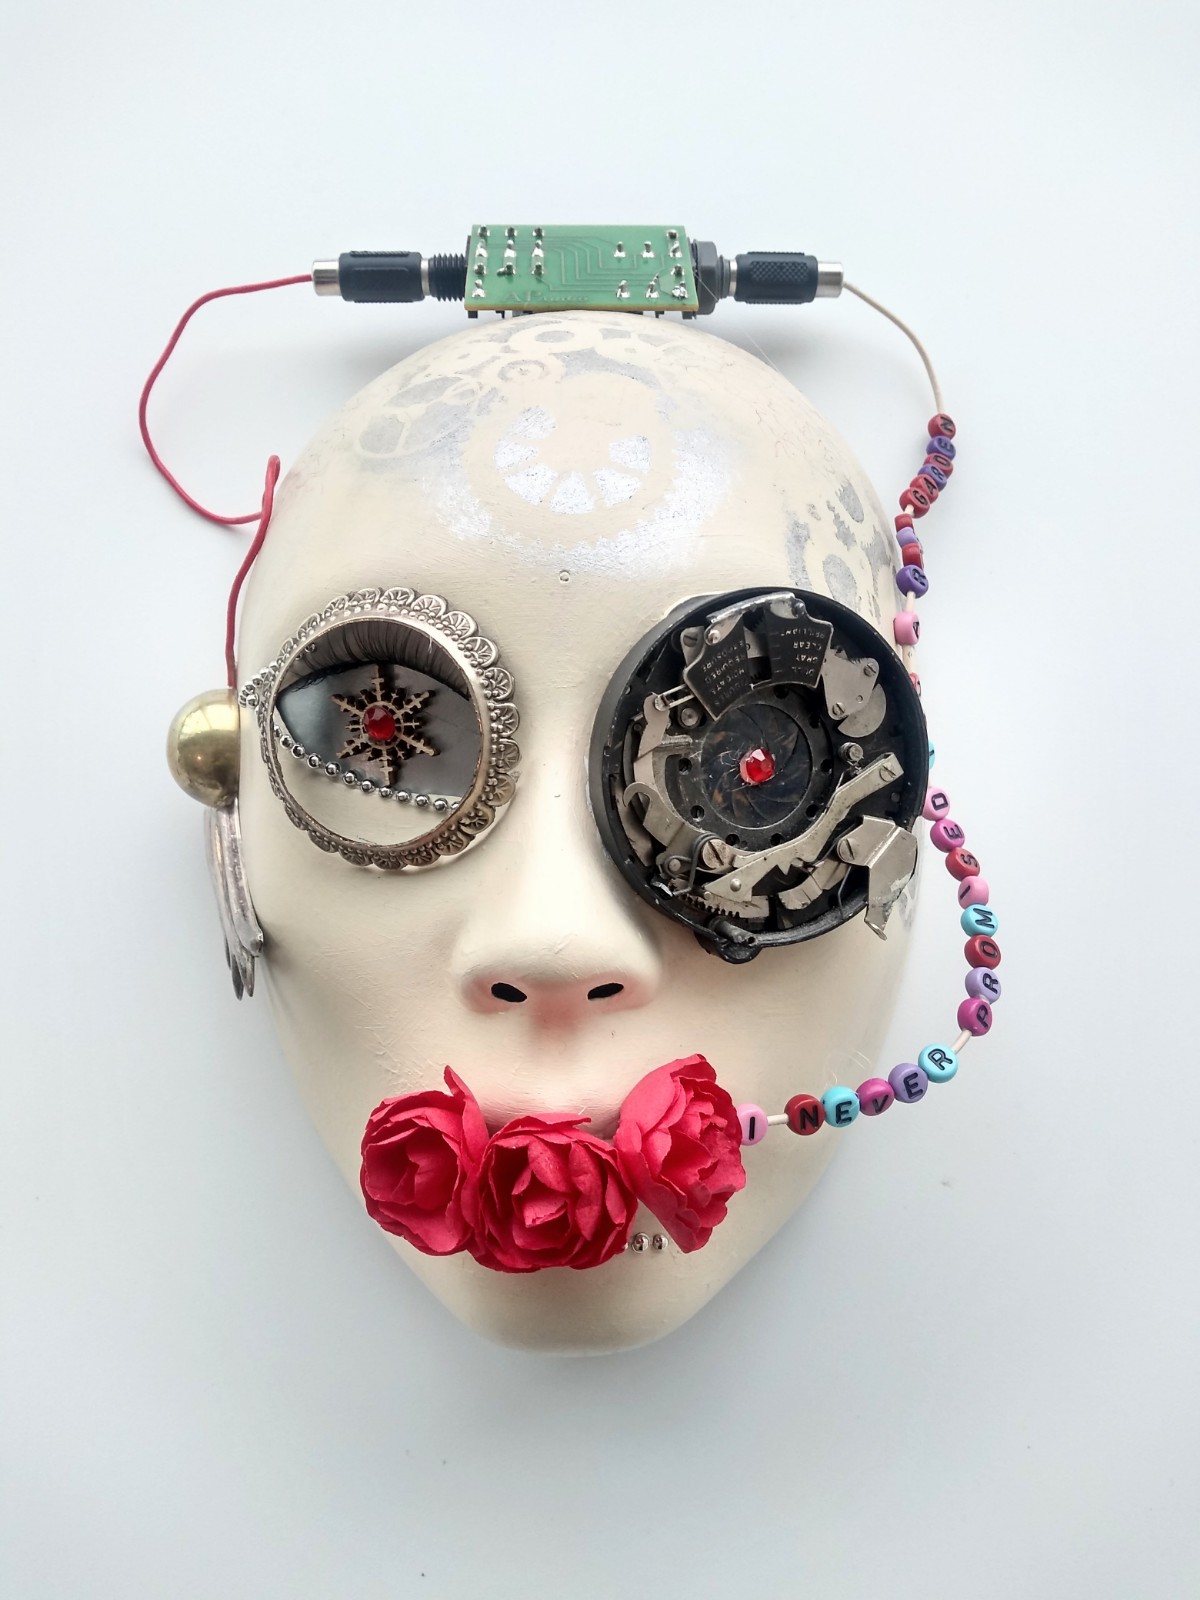 A 3-D white mask with steampunk style fixtures. Three red roses coming out of its mouth and beads on the side of its head that read "I never promised you a rose garden"